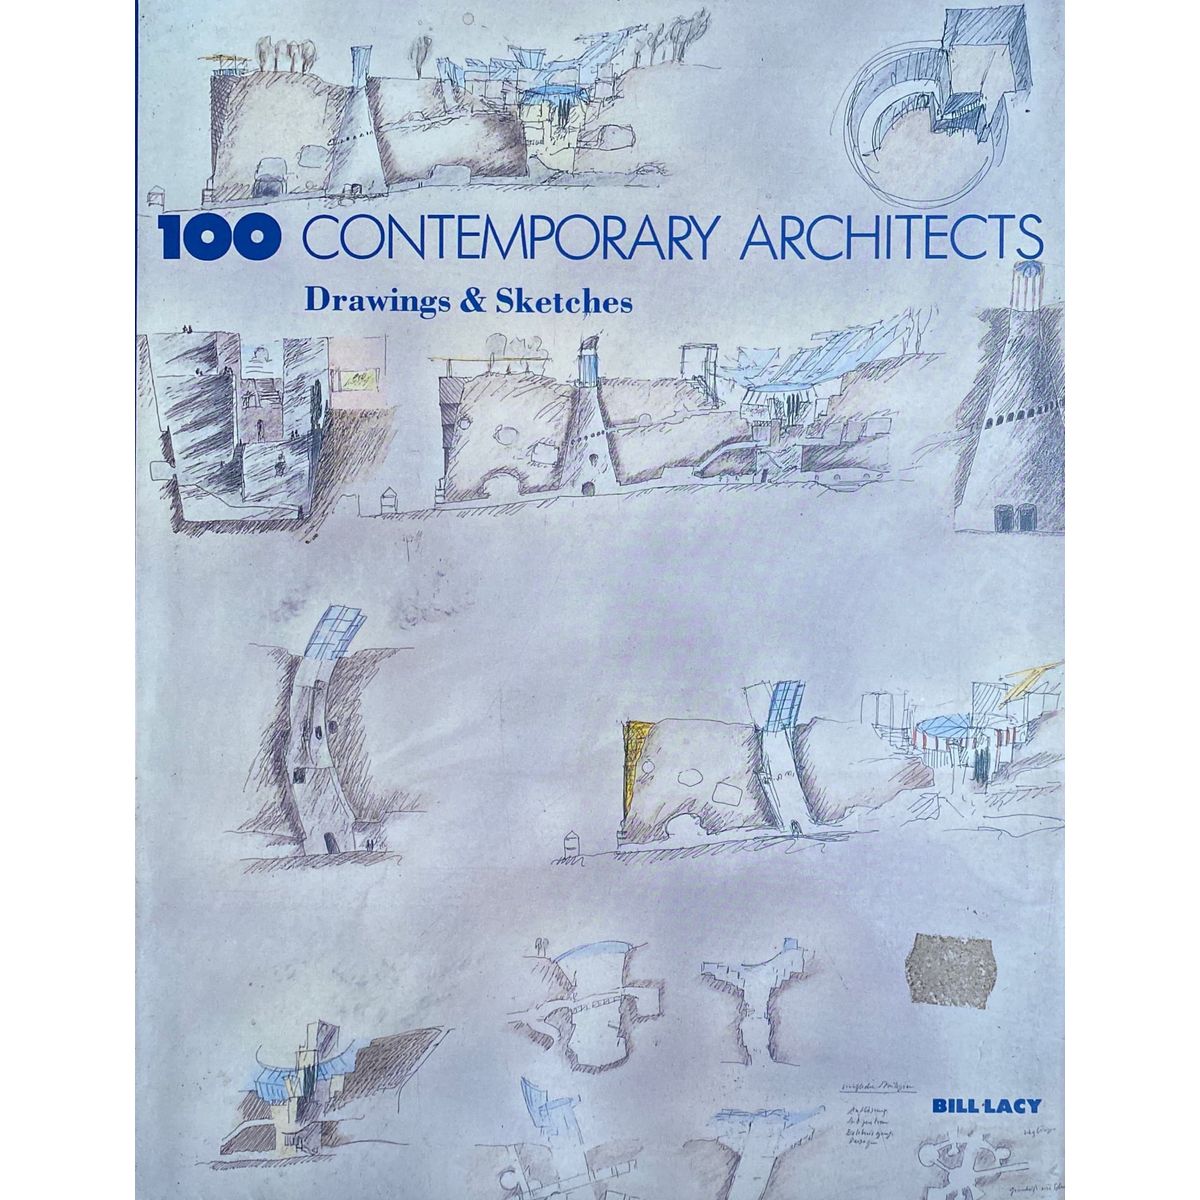 ISBN: 9780500341193 / 0500341192 - 100 Contemporary Architects: Drawings & Sketches by Bill Lacey [1991]